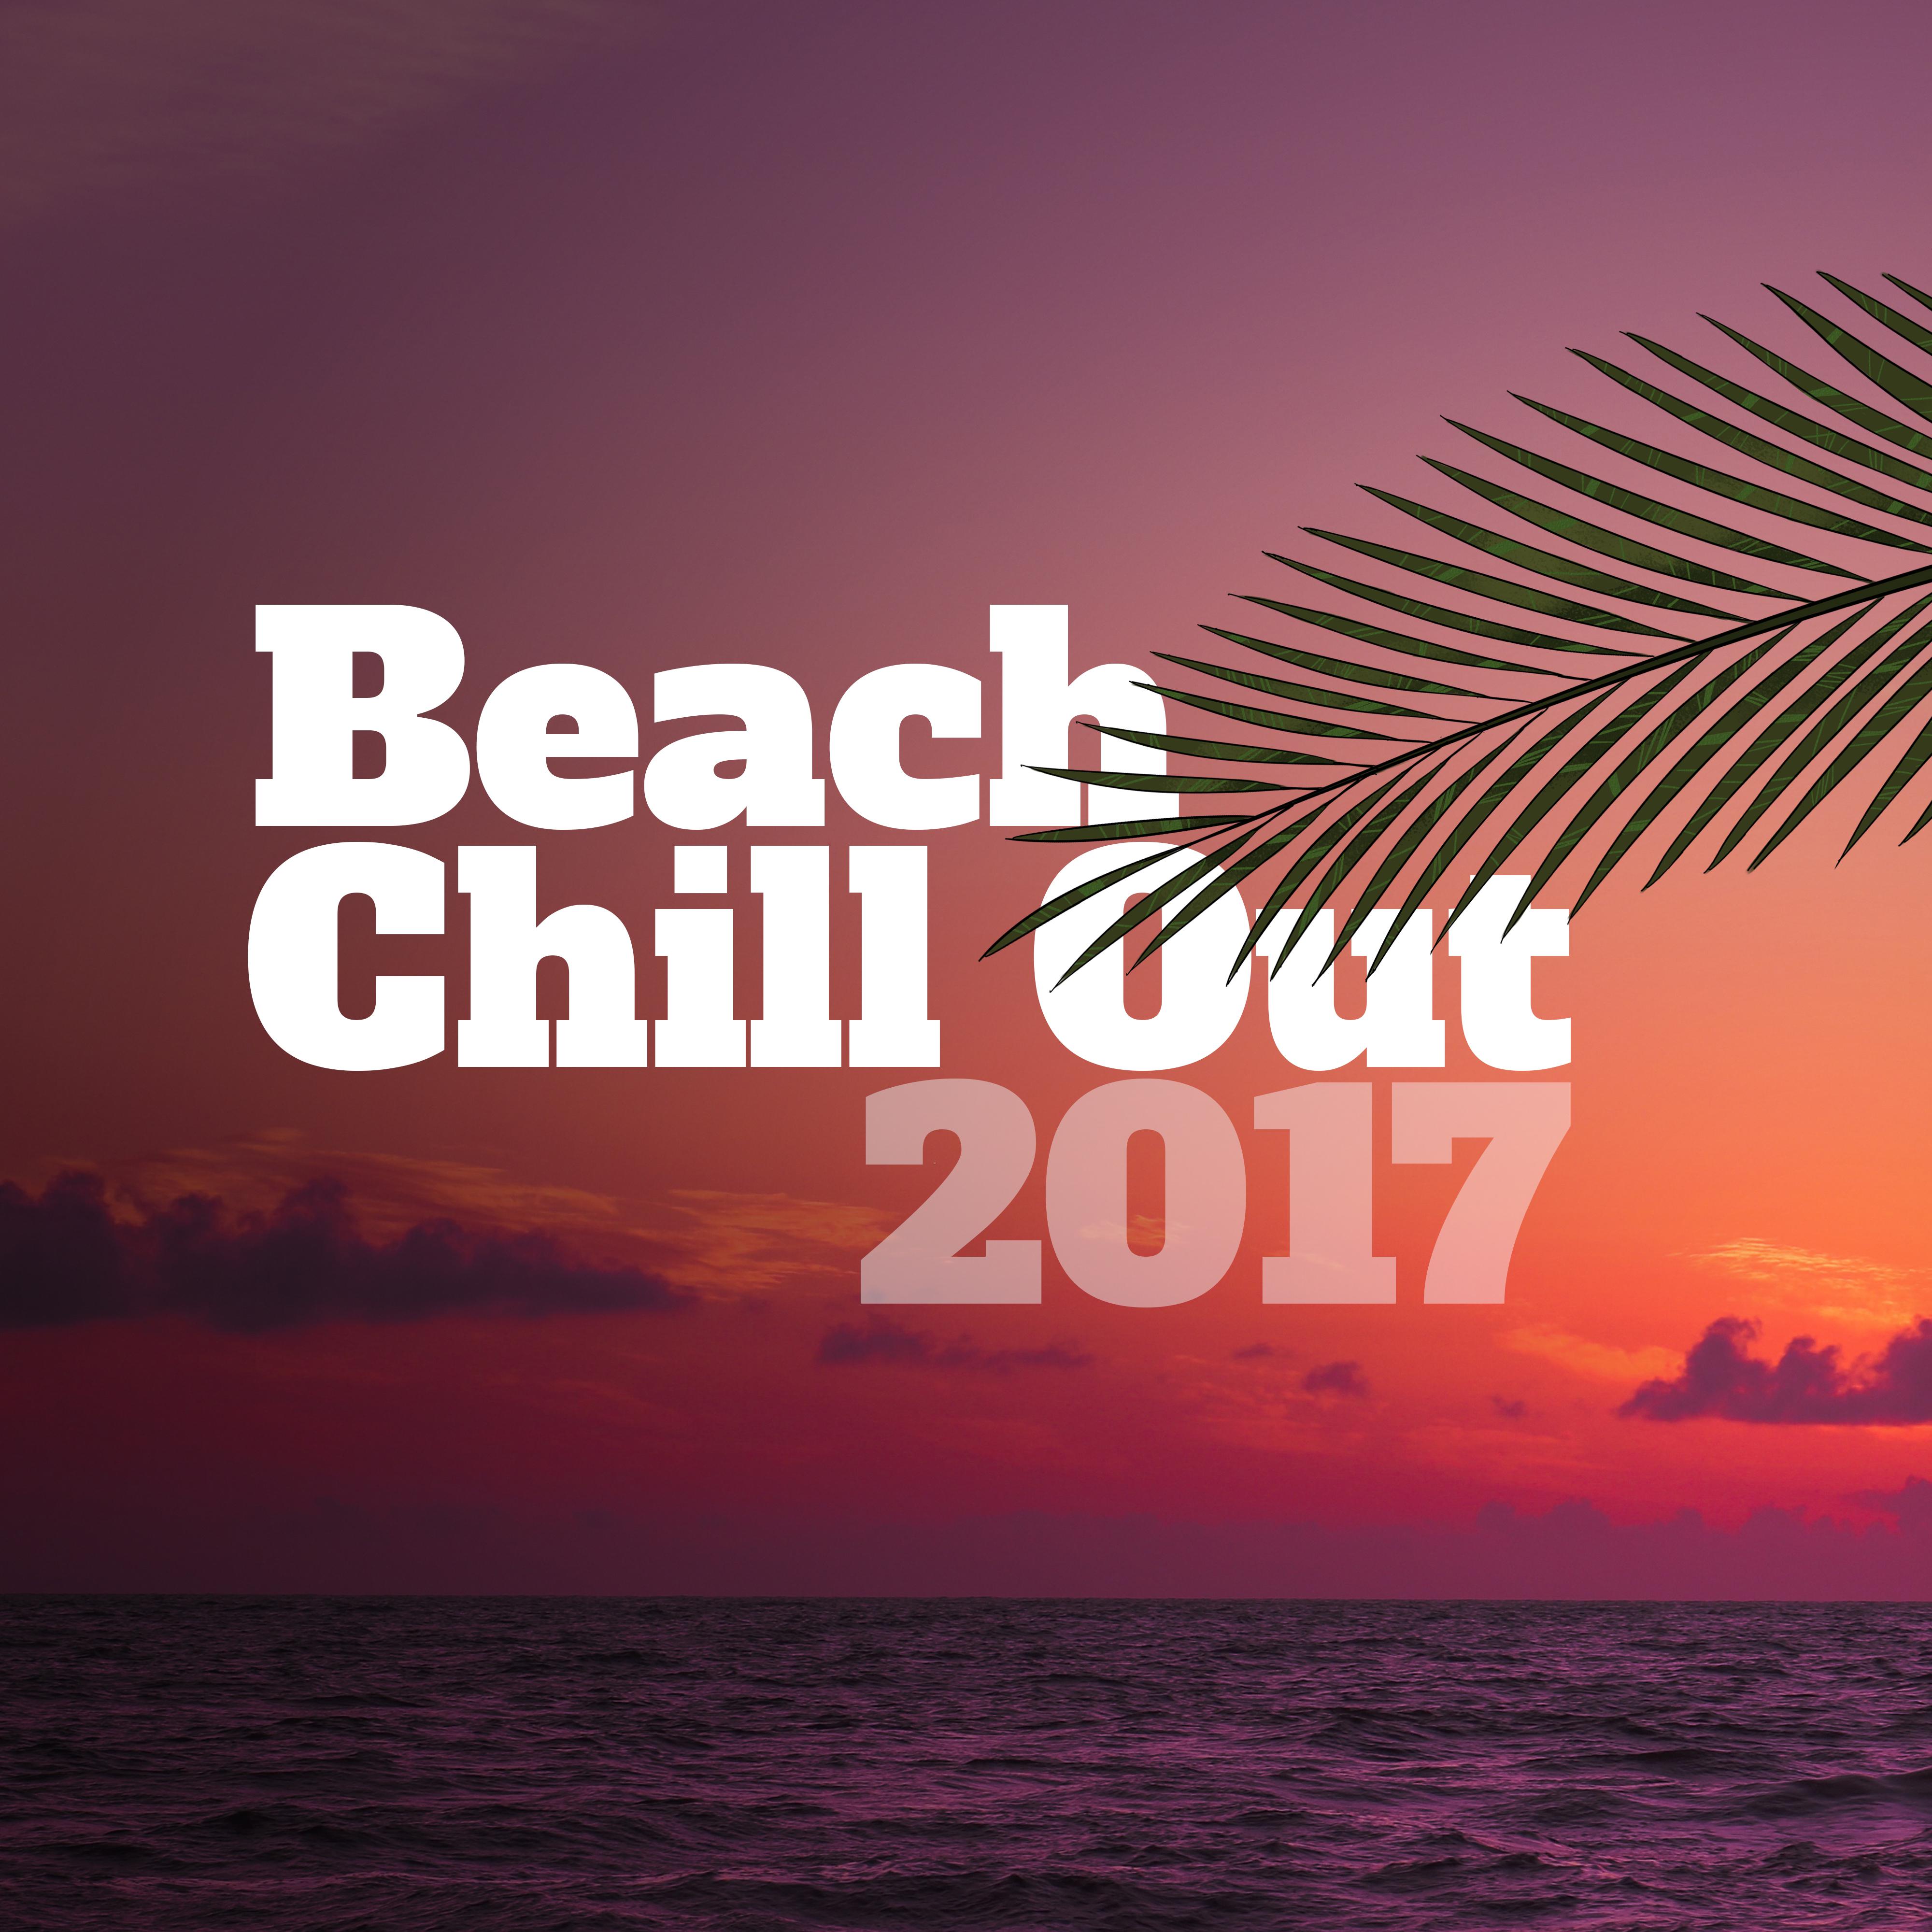 Beach Chill Out 2017 – Summer Beats, Deep Chill Out Lounge, Beach Music, Ibiza 2017, Bar Chill Out, Perfect Relax